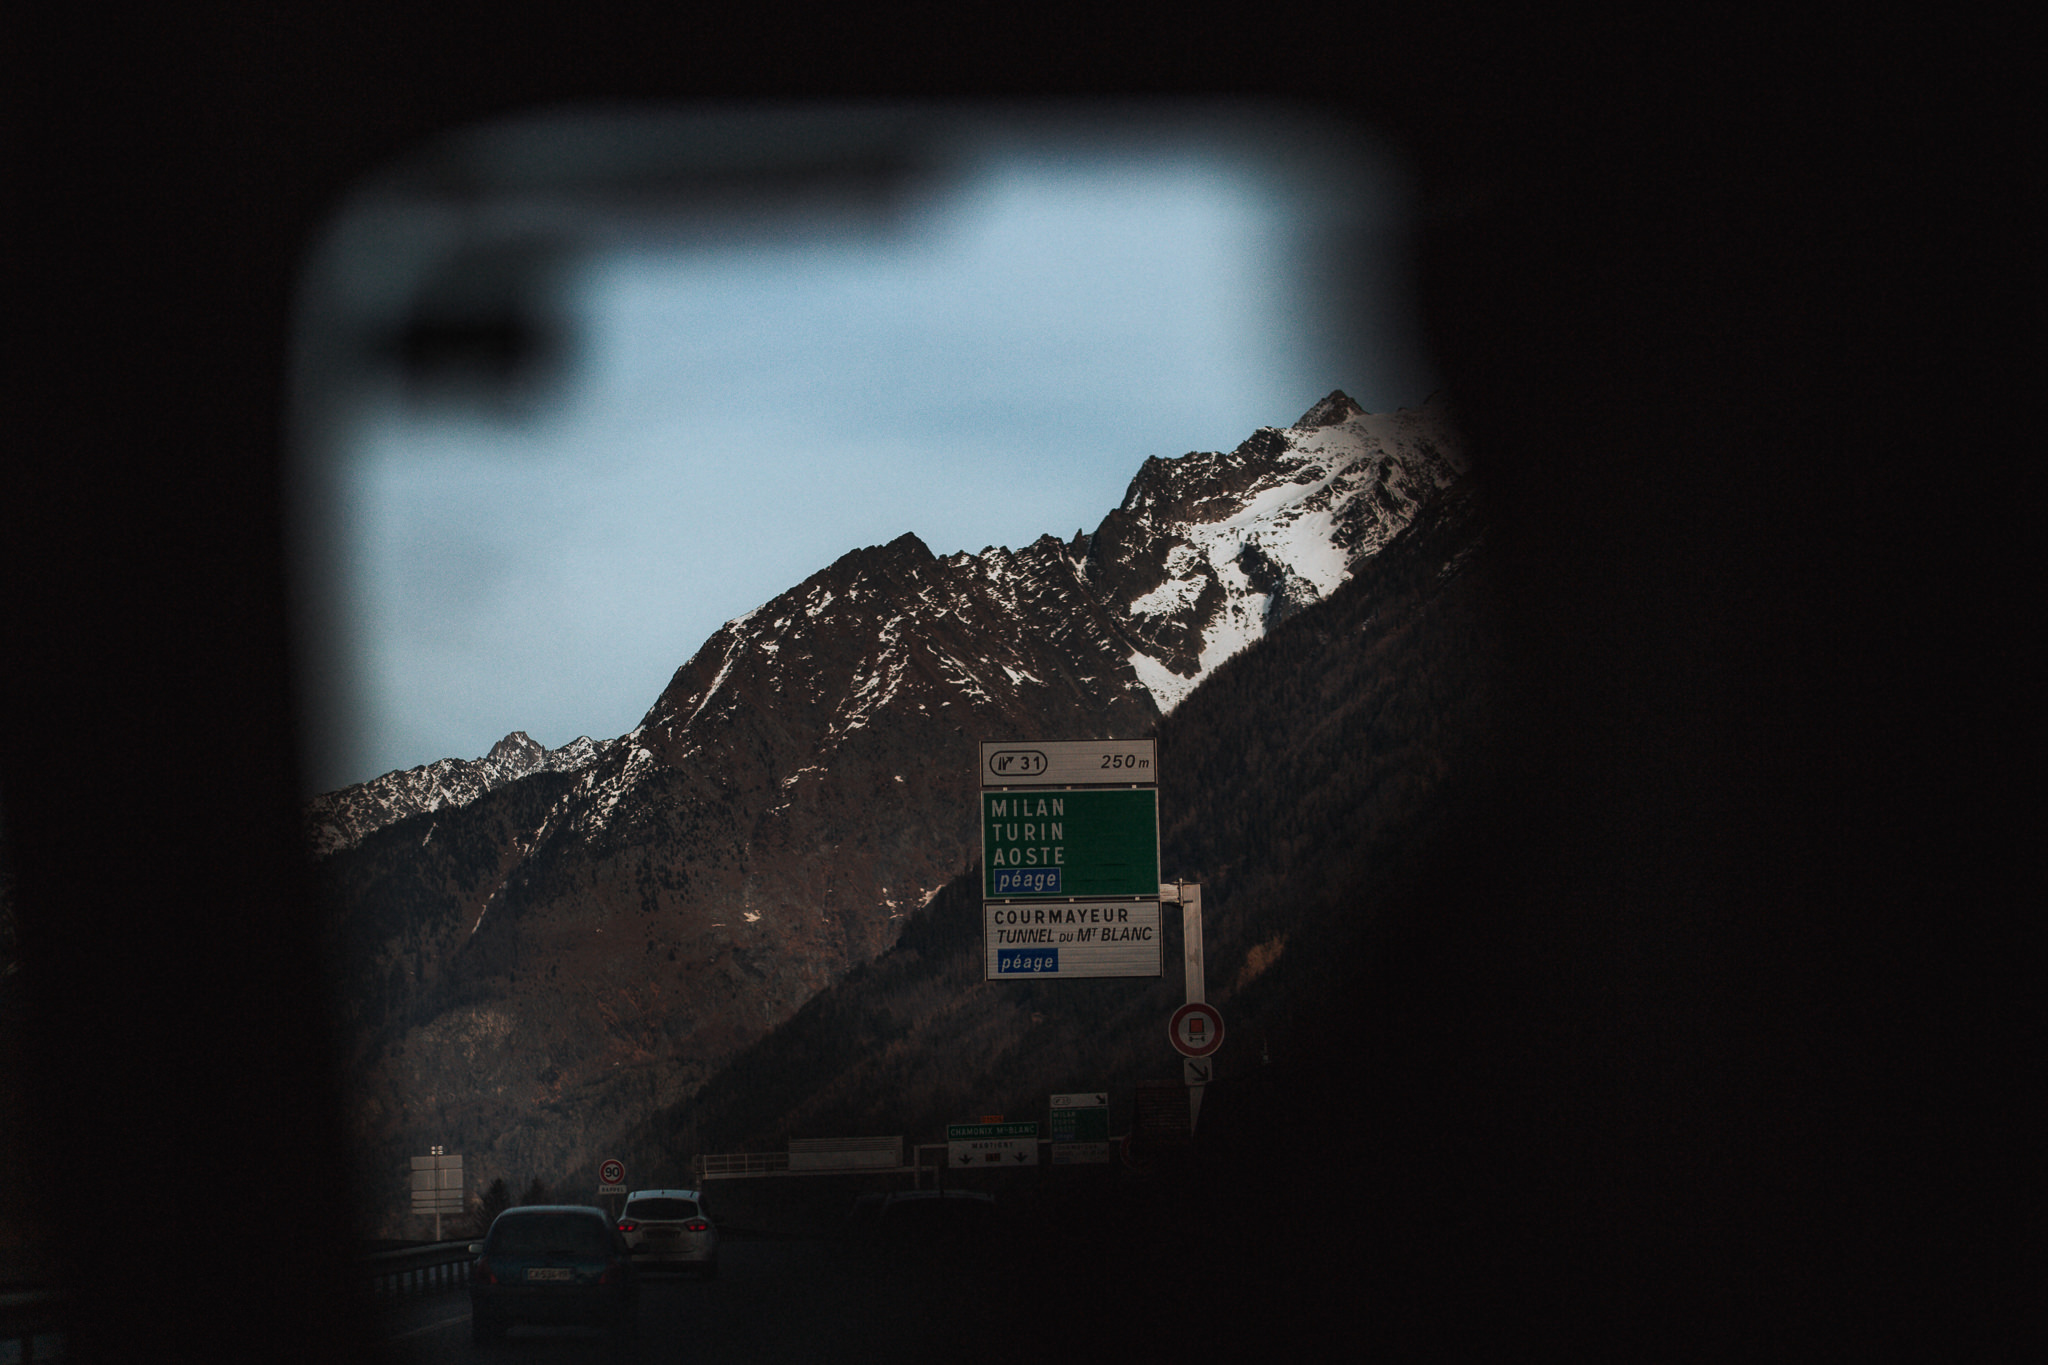   The turn off for Courmayeur approaching. it is a small Italian town accessed via the Mont Blanc Tunnel. A tunnel that runs through the mountains and connects two countries.  